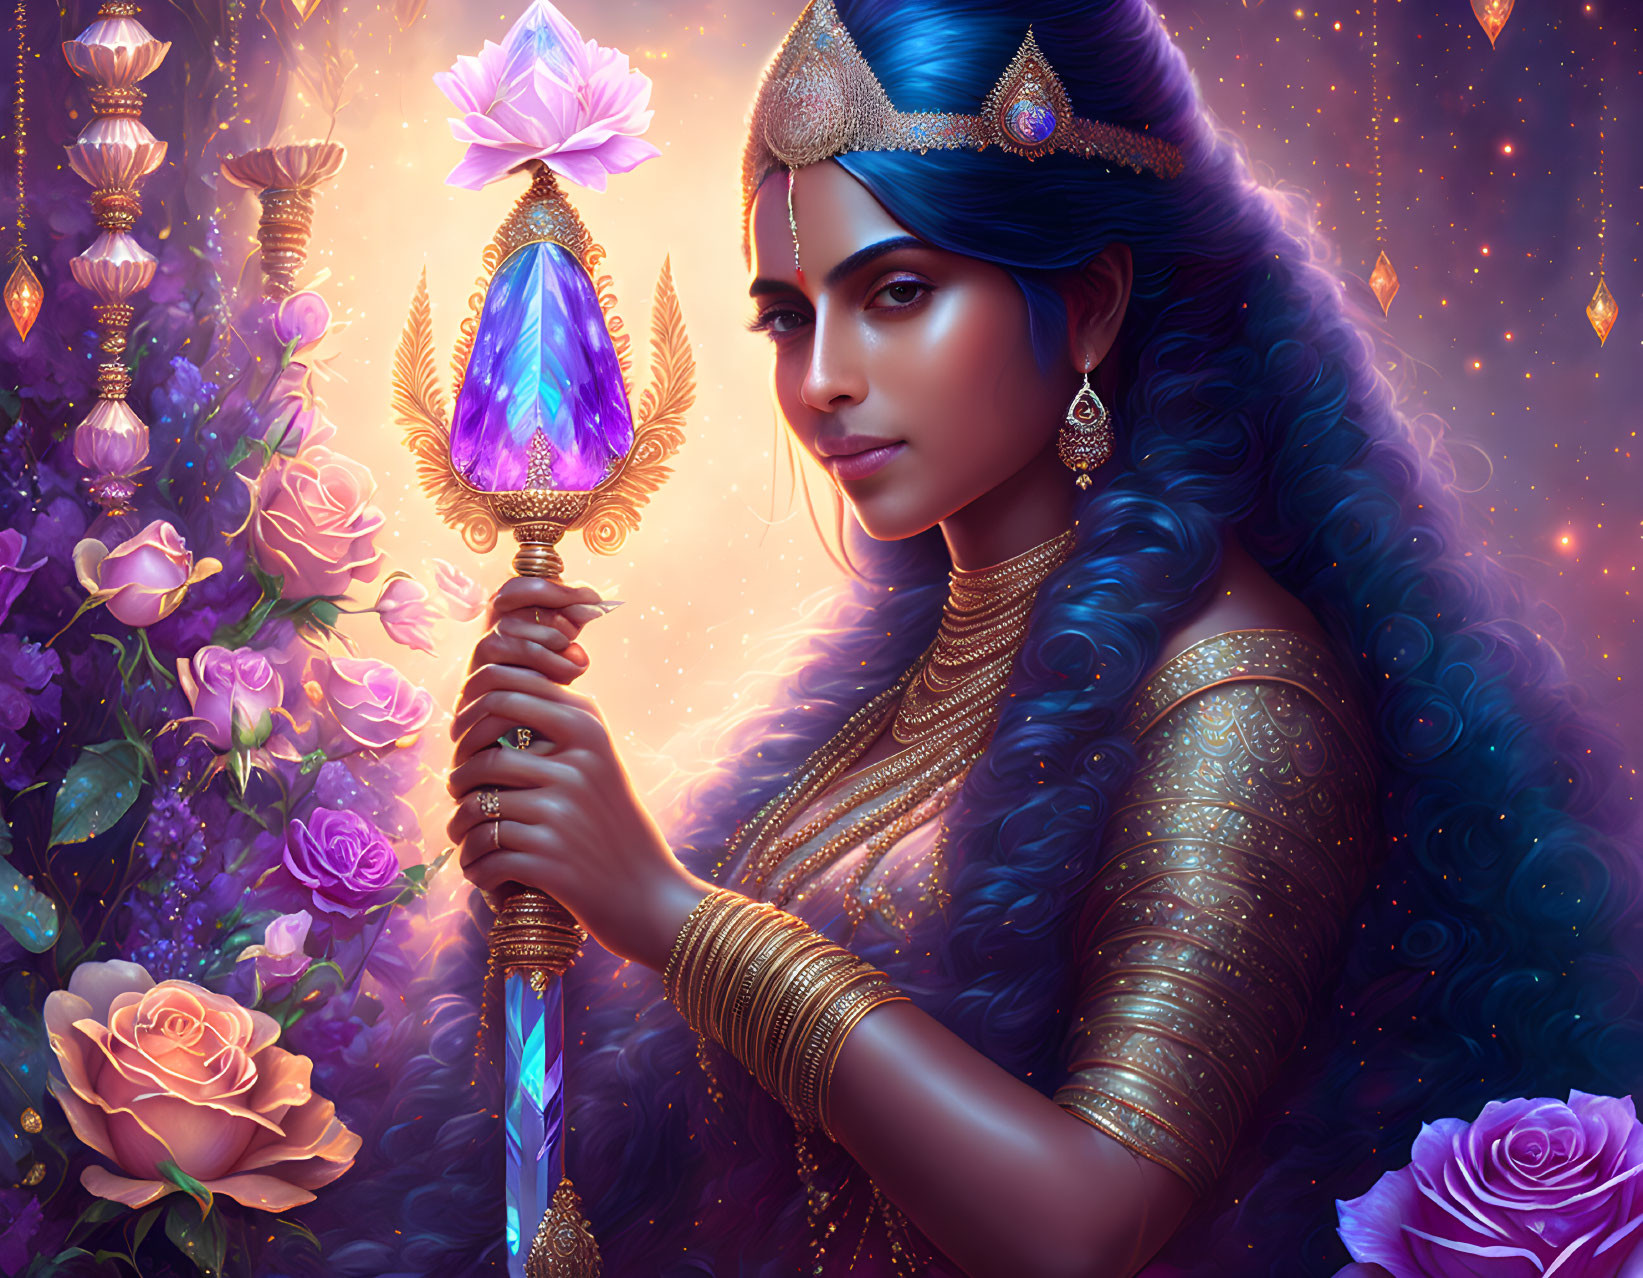 Dark-haired woman adorned with gold and blue jewels holding a glowing scepter amidst purple roses and stars